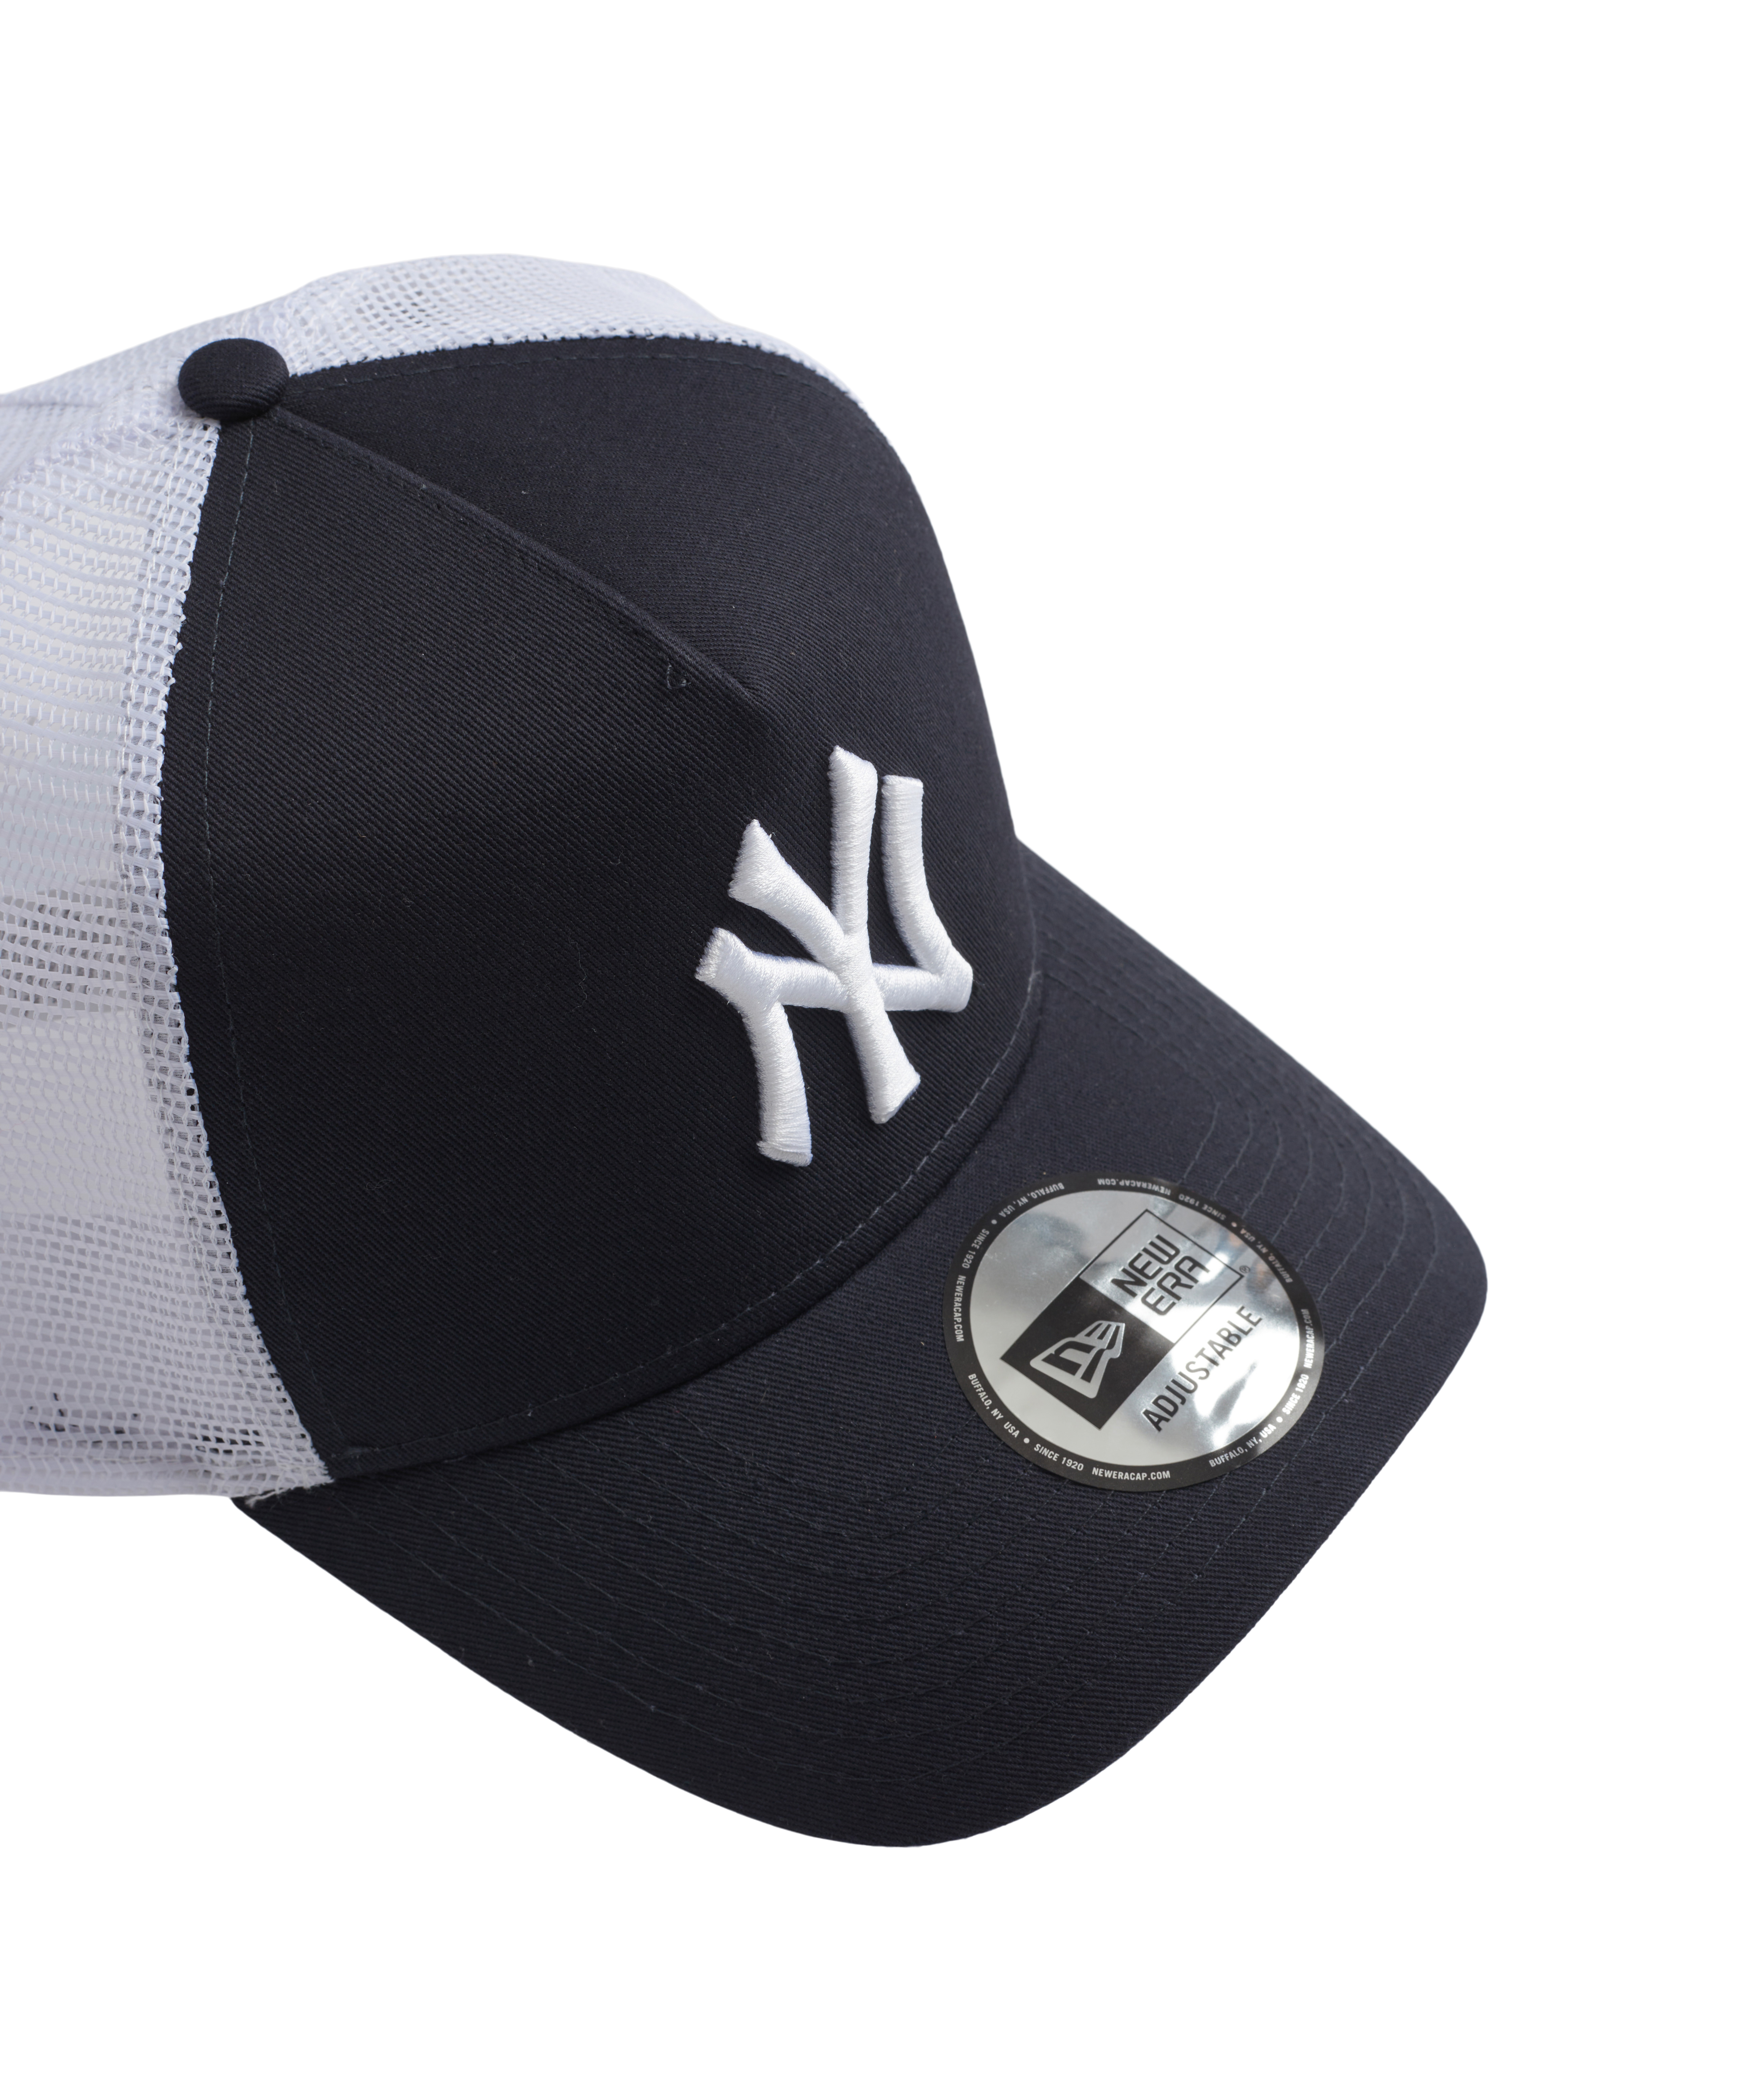 outfit women's new york yankees hat